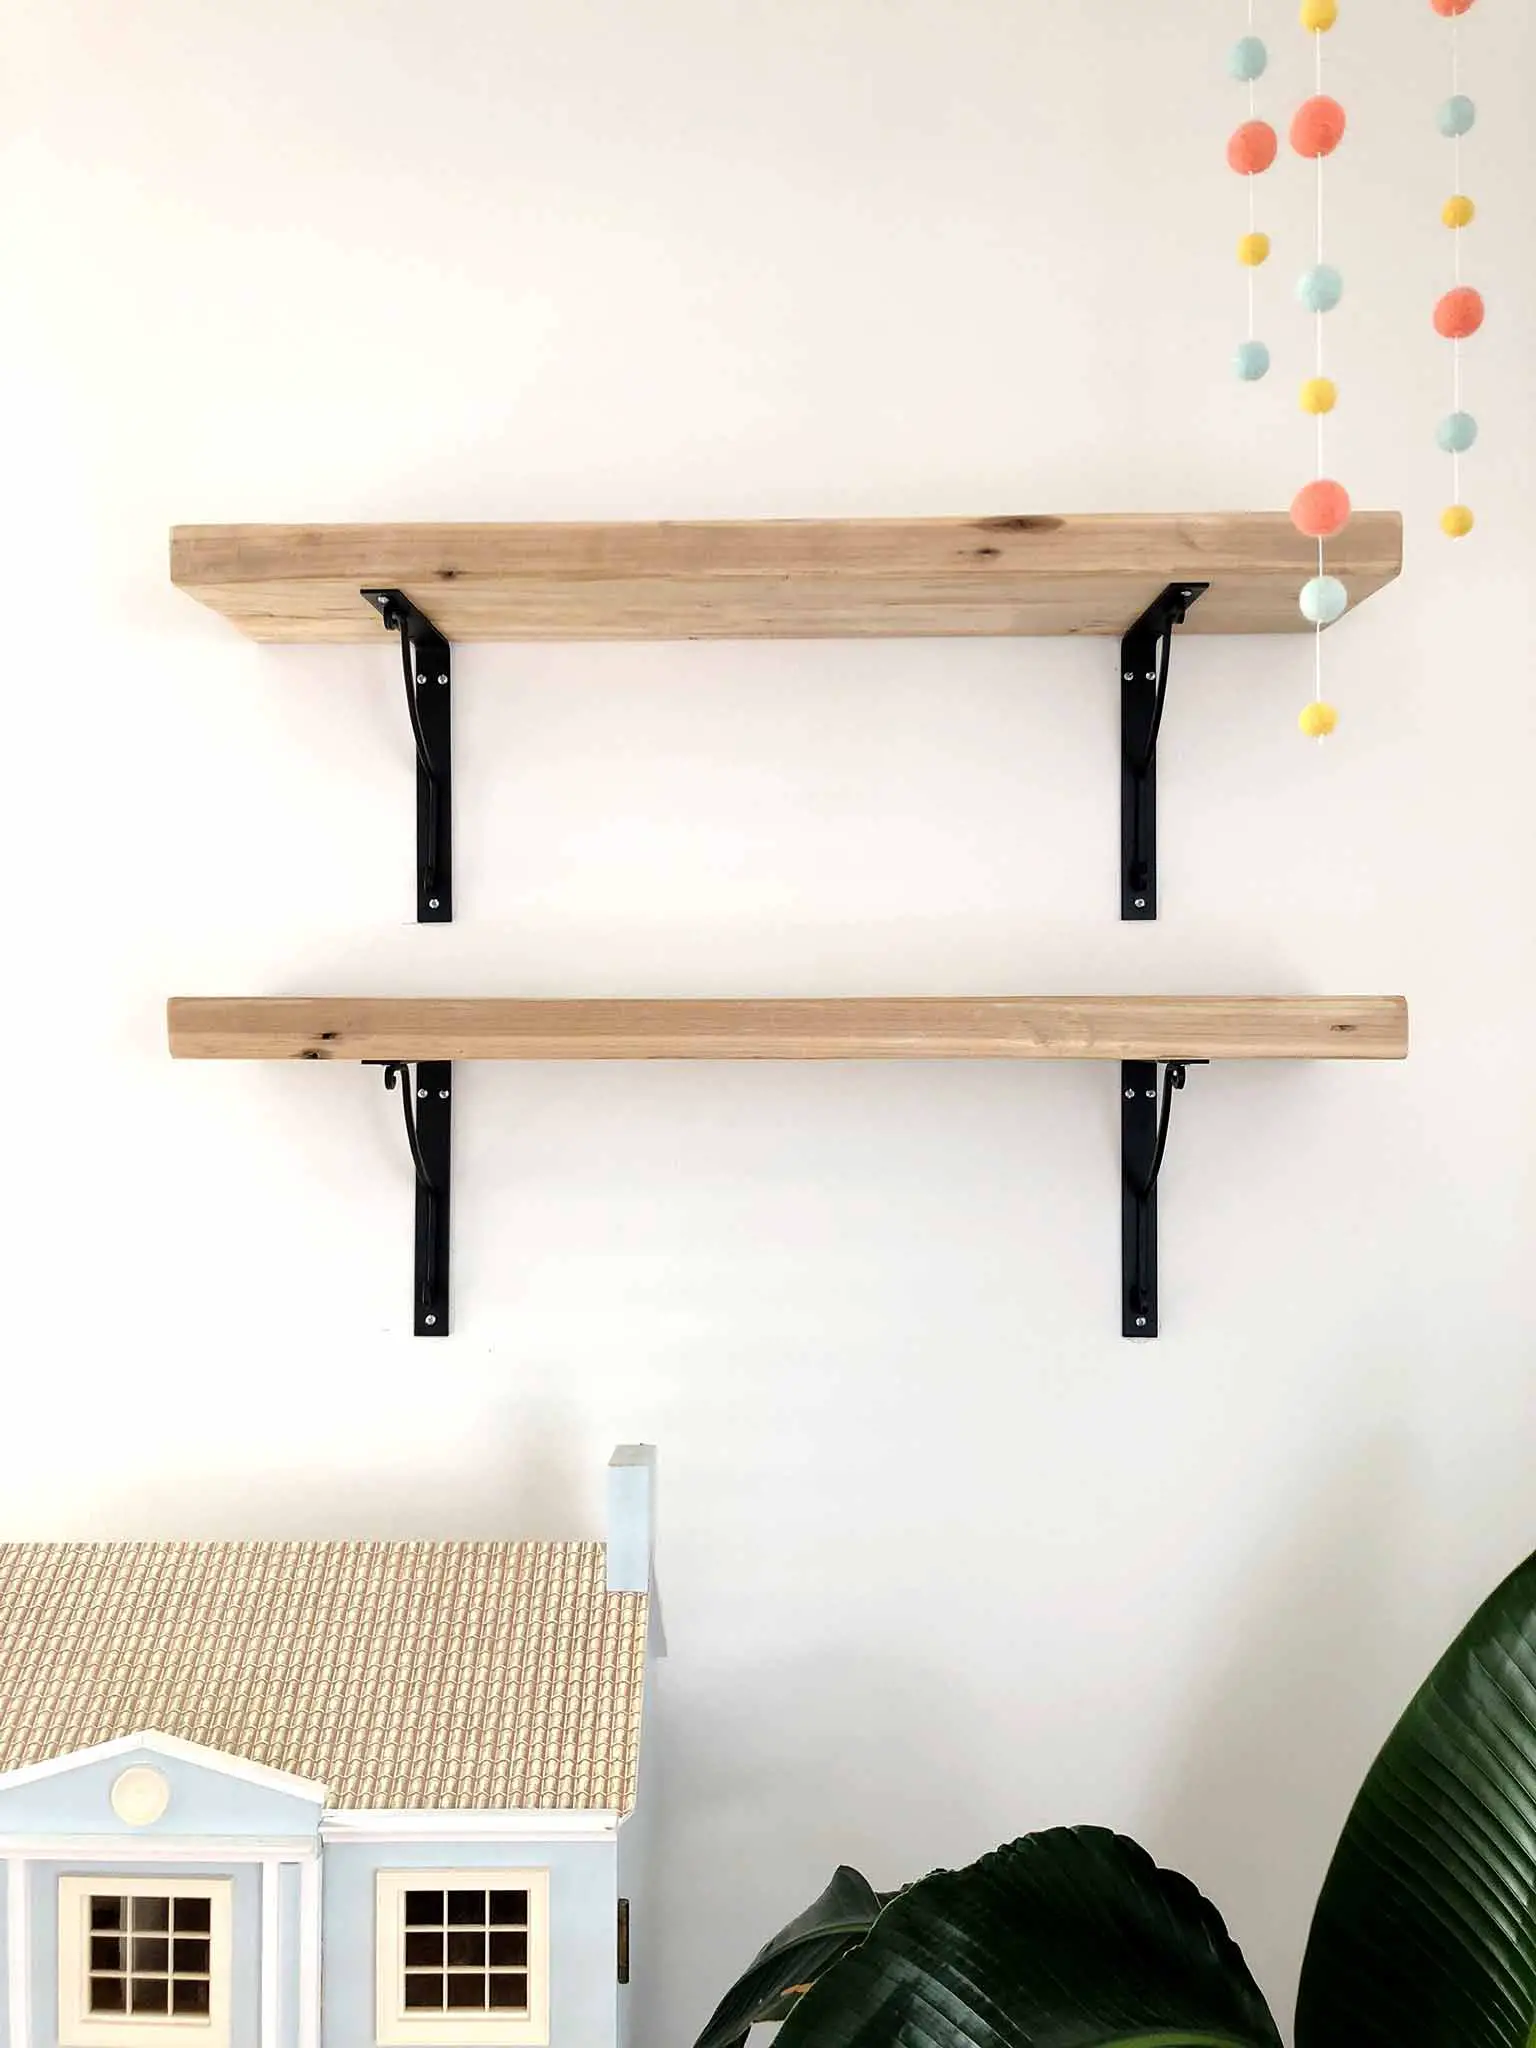 Making wall shelves out of reclaimed wood - Guest Participant of the One Room Challenge - That Homebird Life Blog